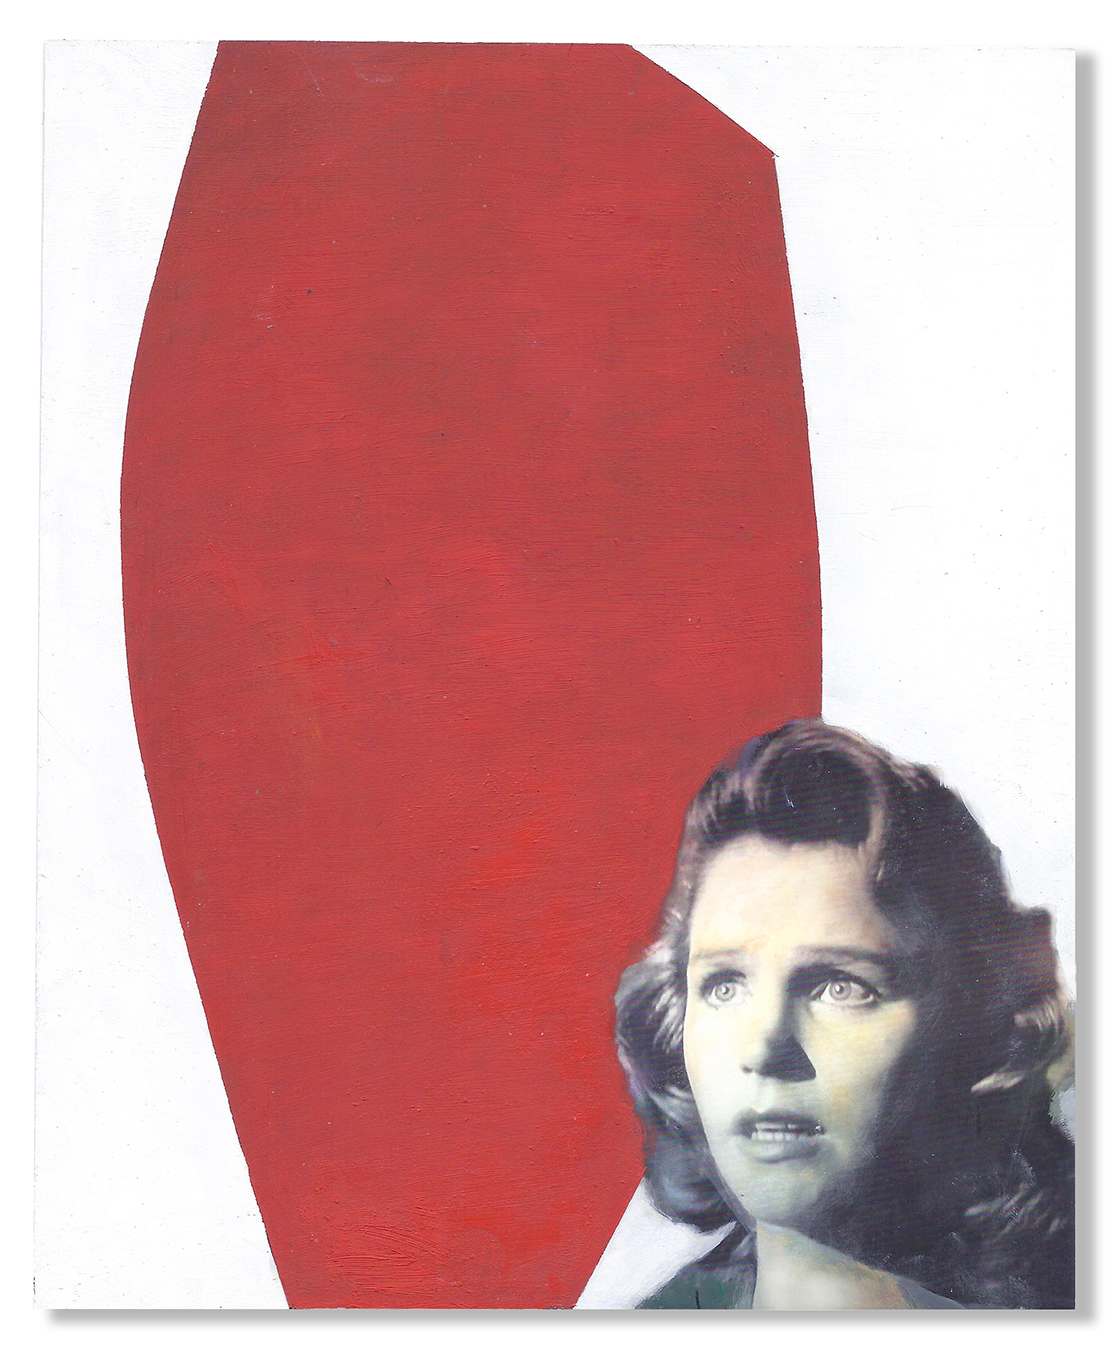 Lee Remick with a 1963 Lorser Feitelson's abstract